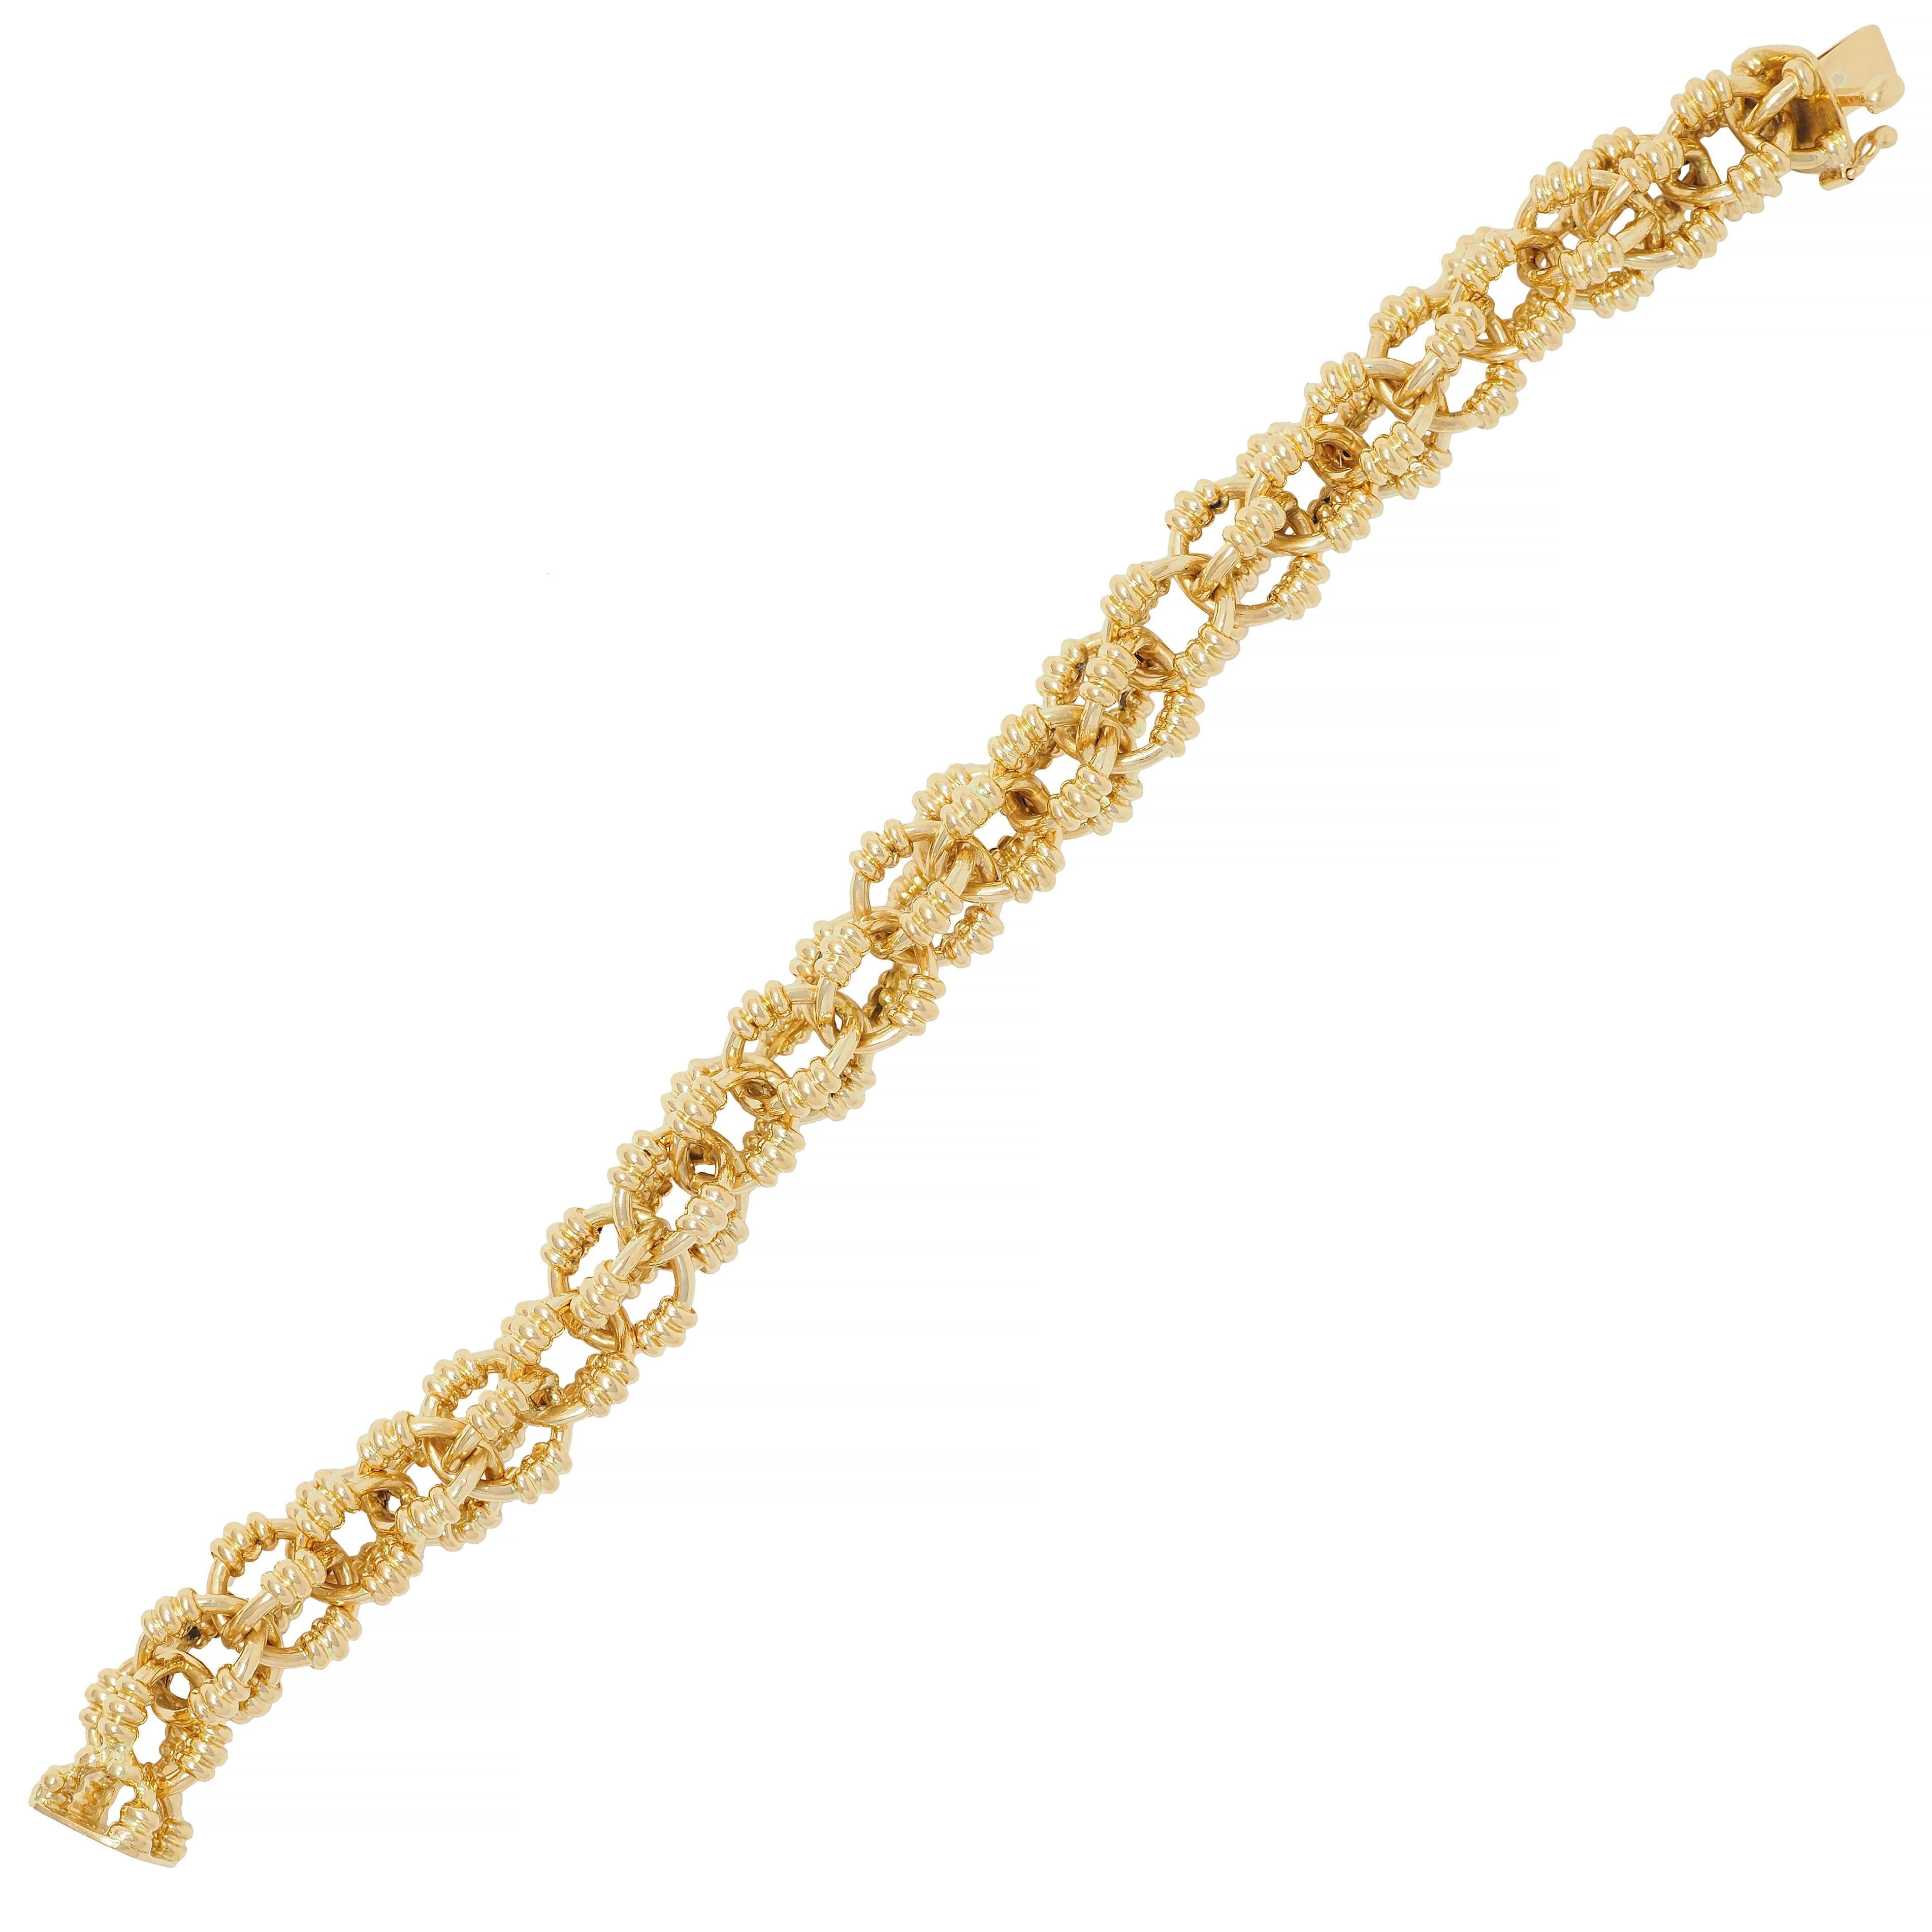 Comprised of open and interlocked sphere-shaped links 
Accented by ridged detailing and high polish finish
Completed by concealed clasp closure 
With figure eight safety 
Stamped for 18 karat gold
Fully signed for Tiffany & Co., Italy
Circa: